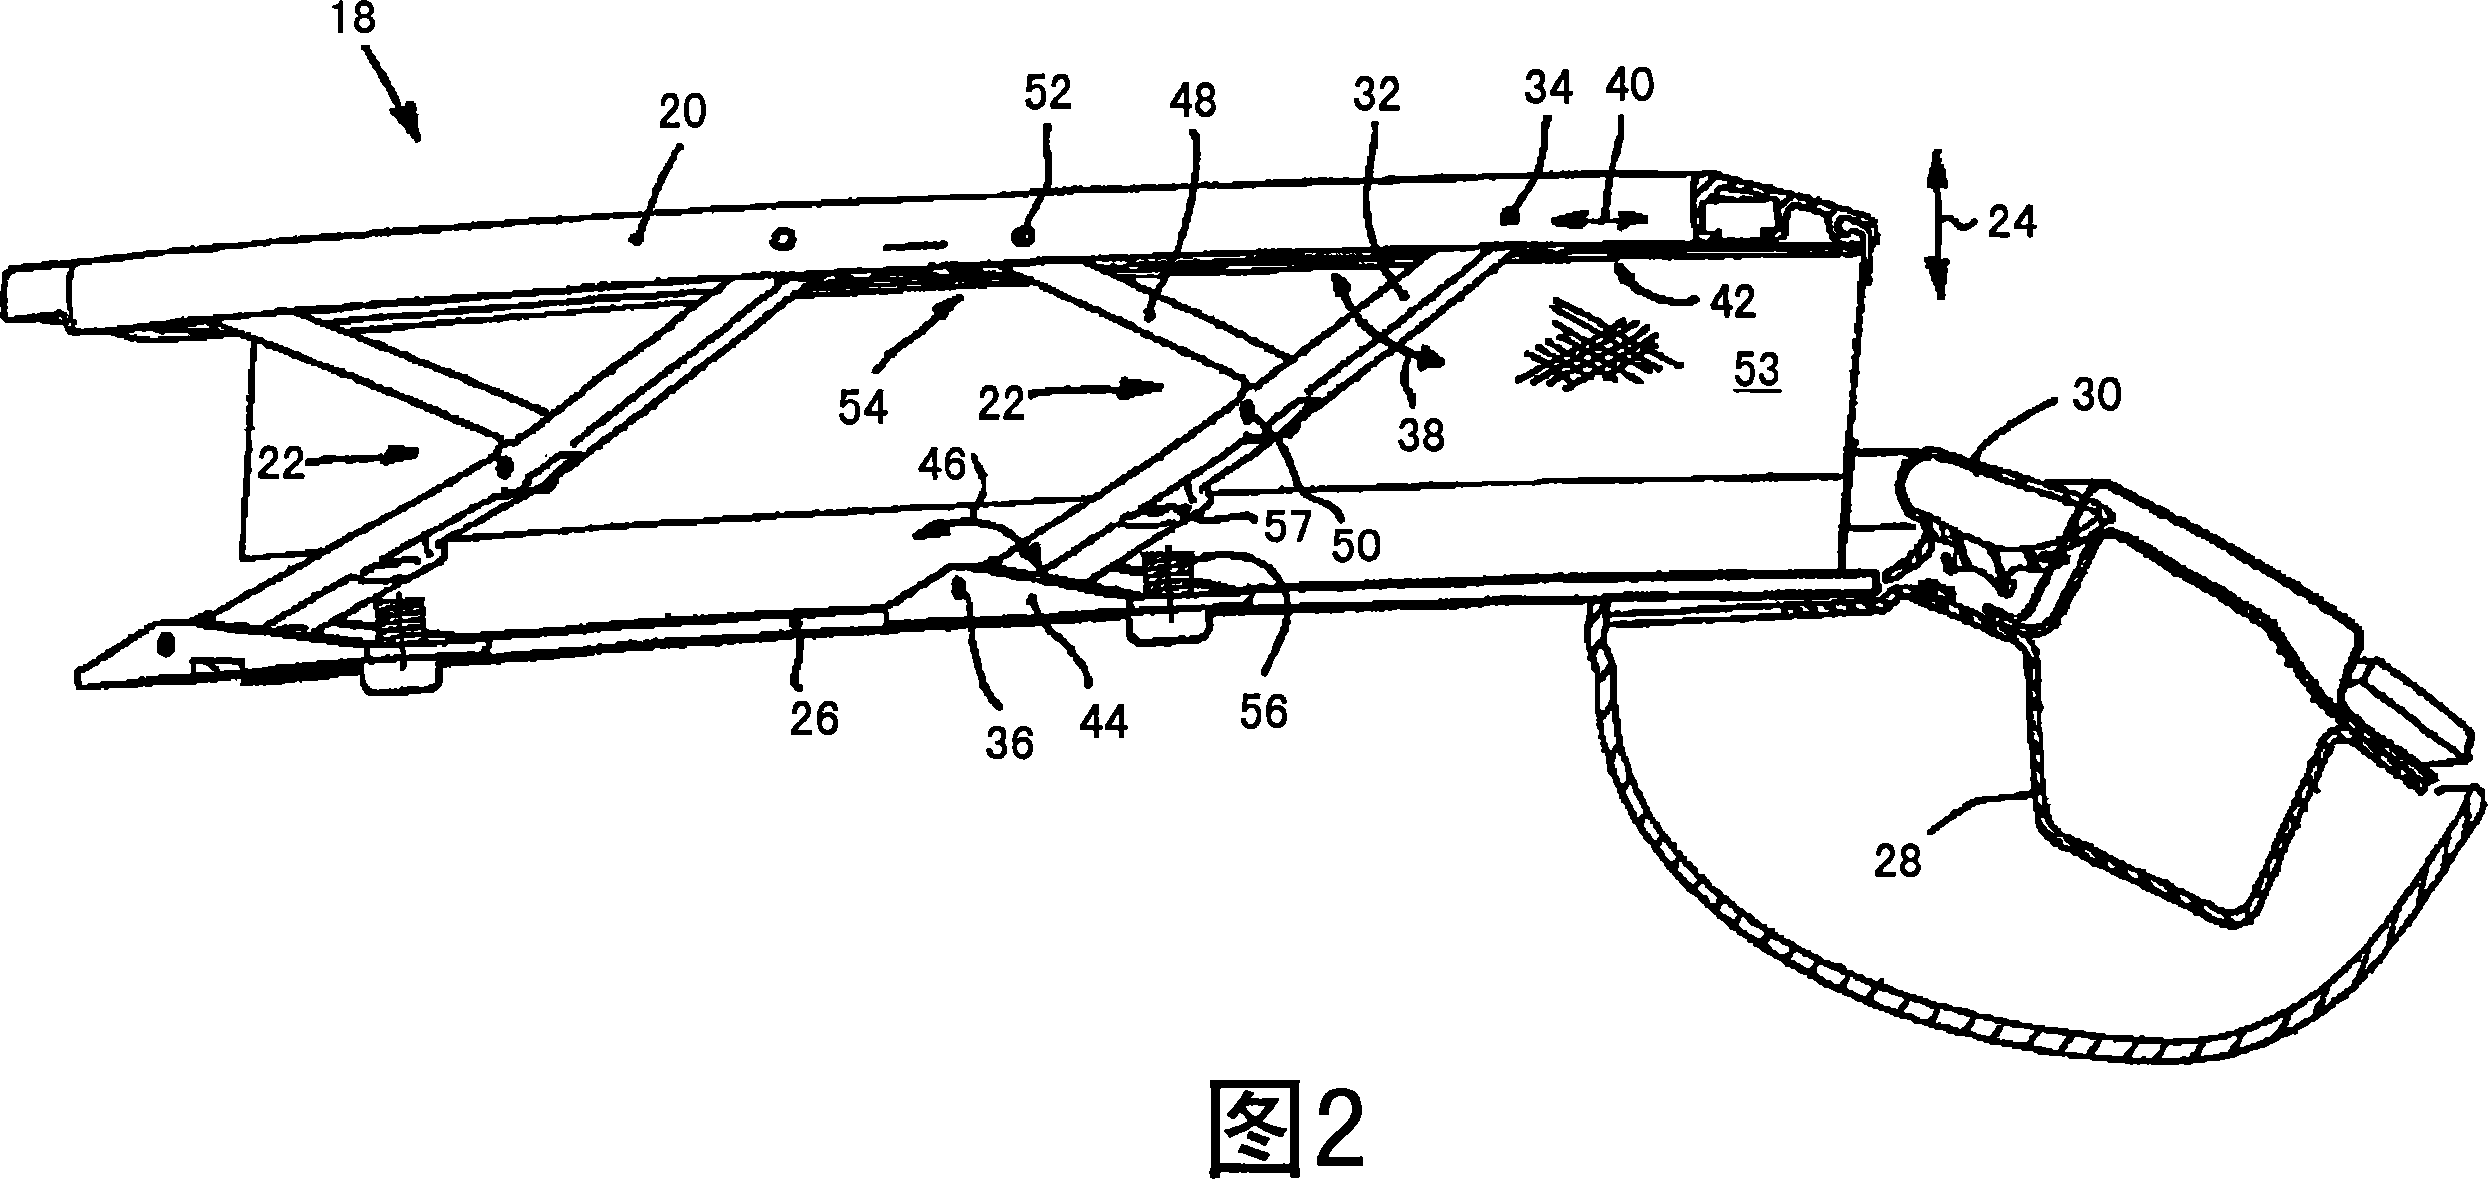 Wind repelling system for a vehicle